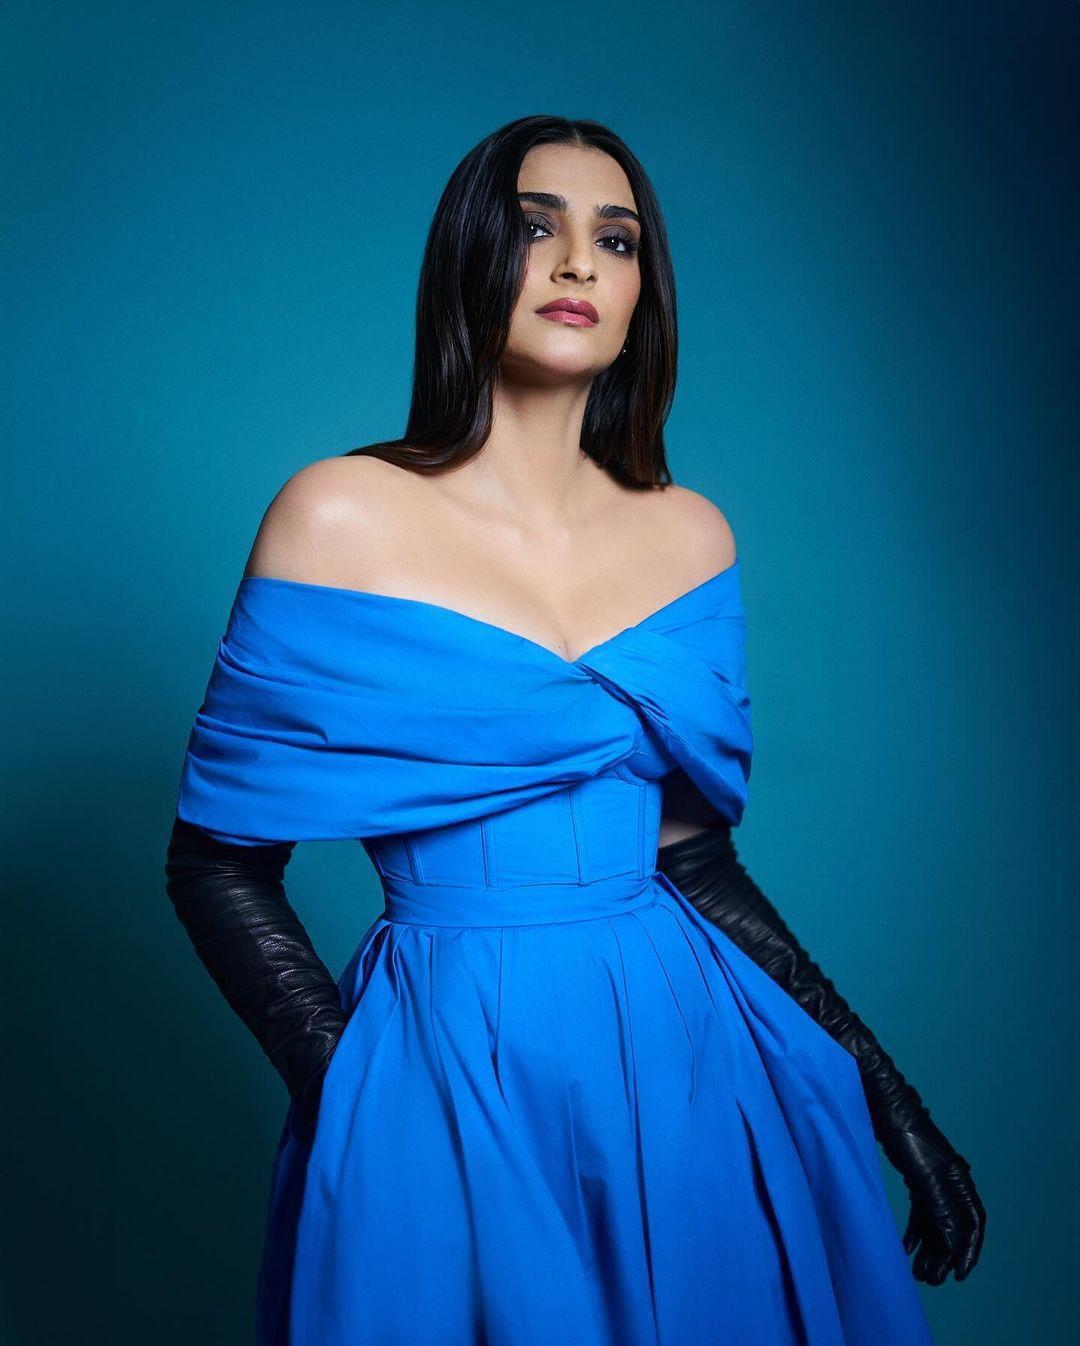 Sonam Kapoor served looks in this off-shoulder blue dress from Alexander McQueen. She paired the dress with black gloves that raised the ensemble to another level